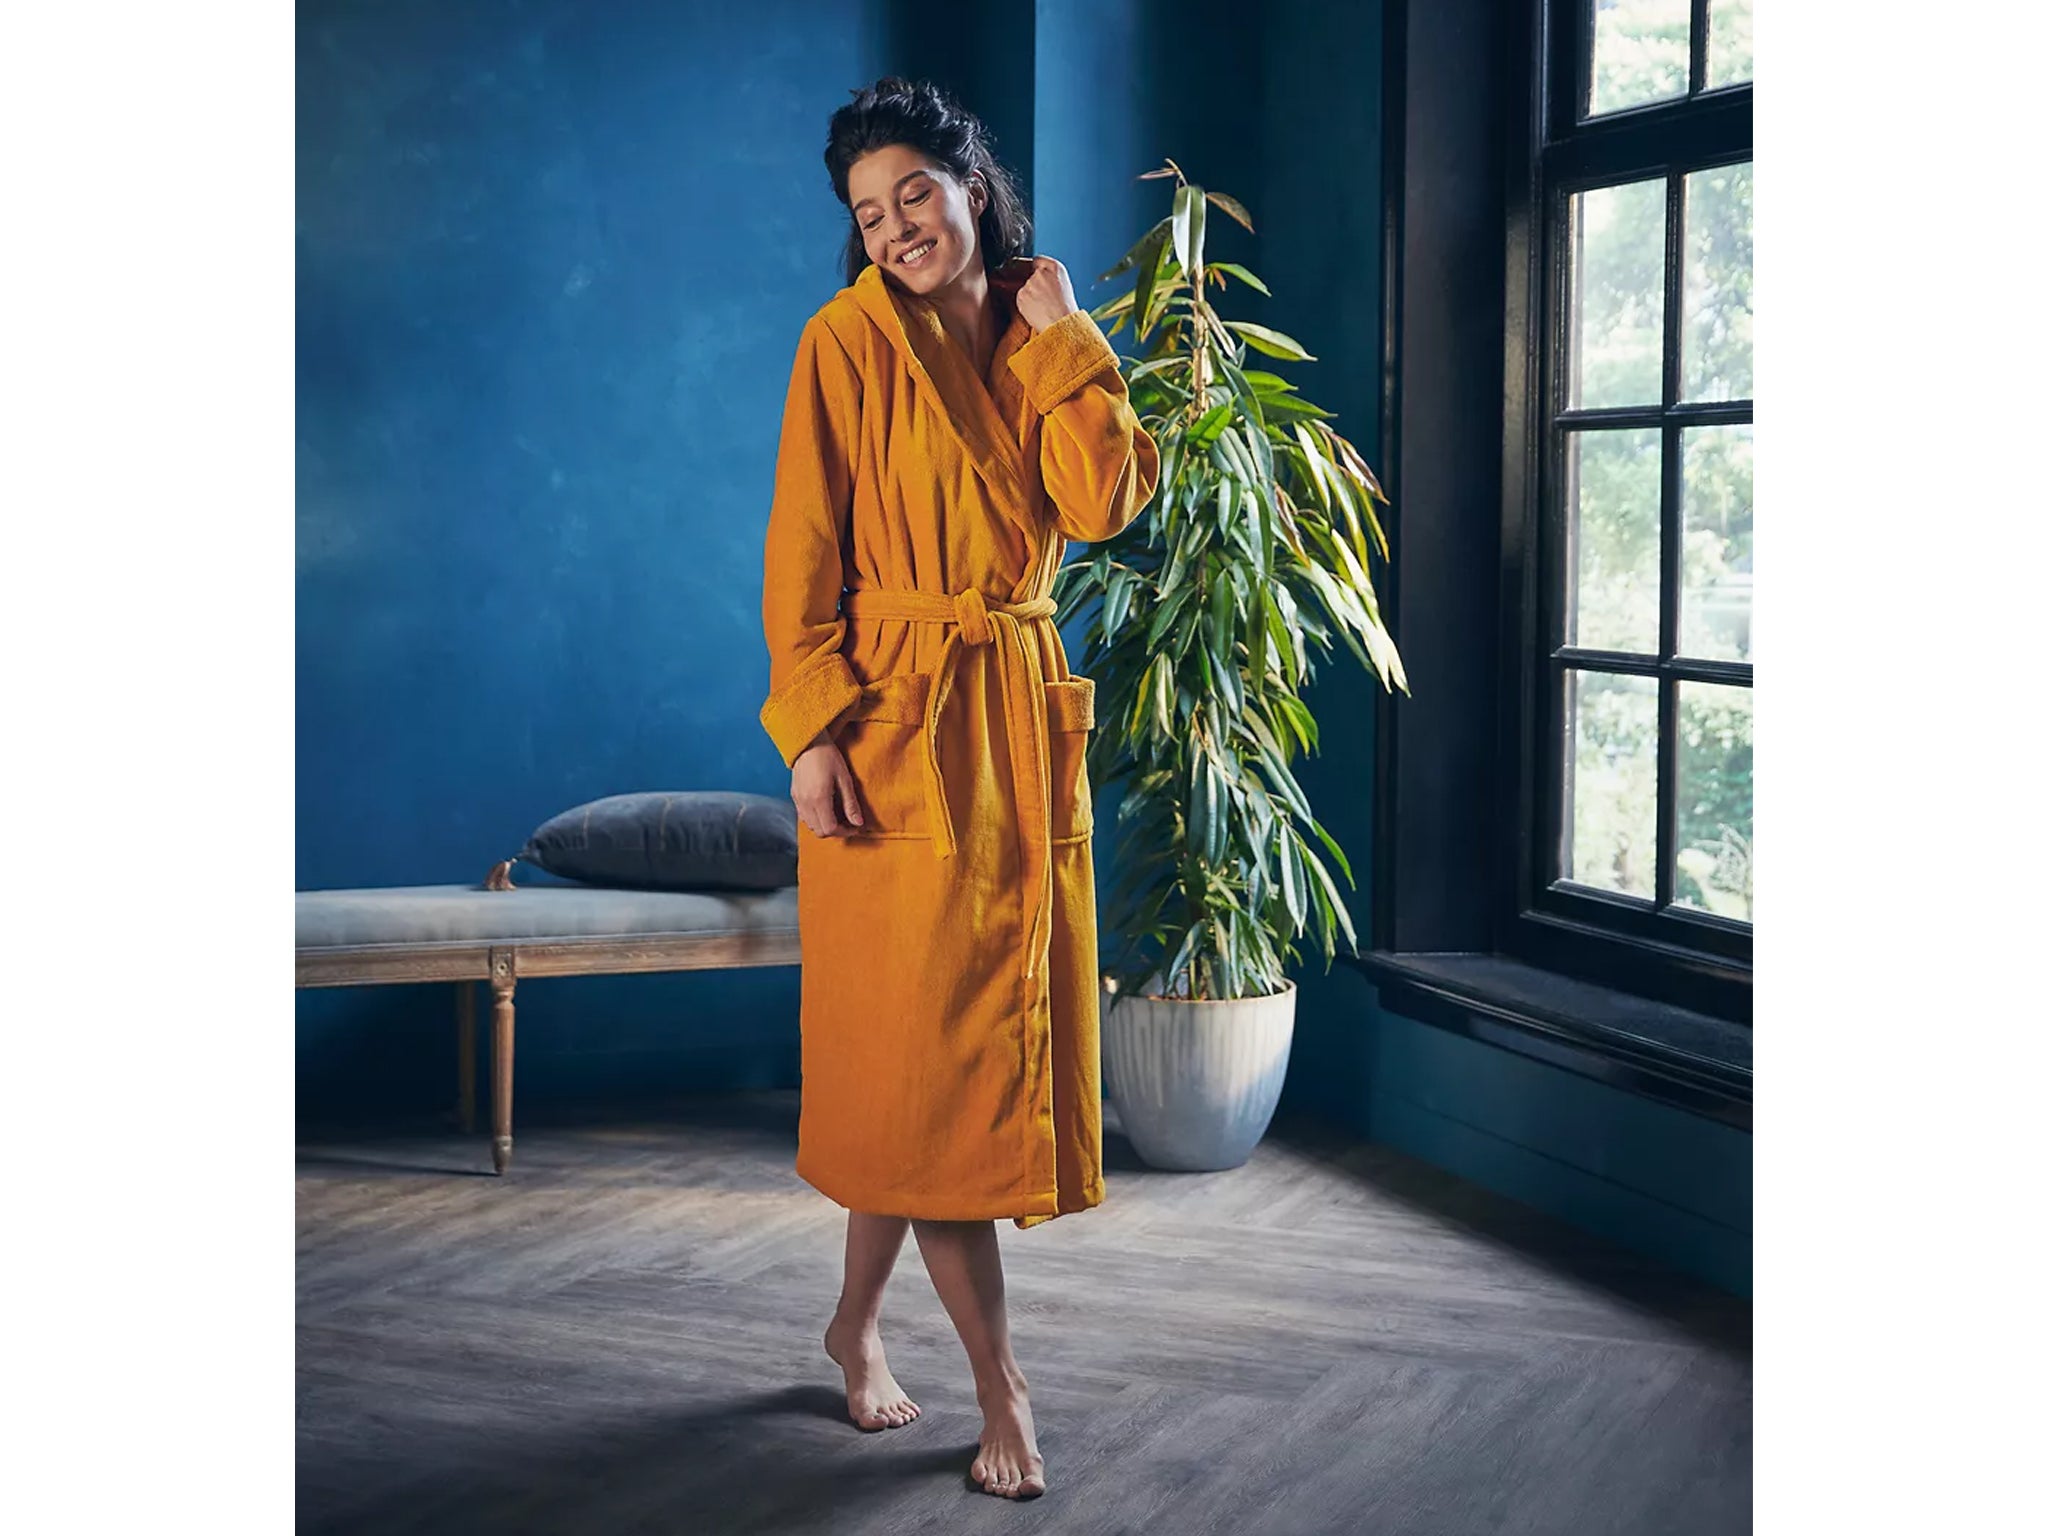 15 Best Robes for Women in 2023 - Comfortable Bathrobes for Women